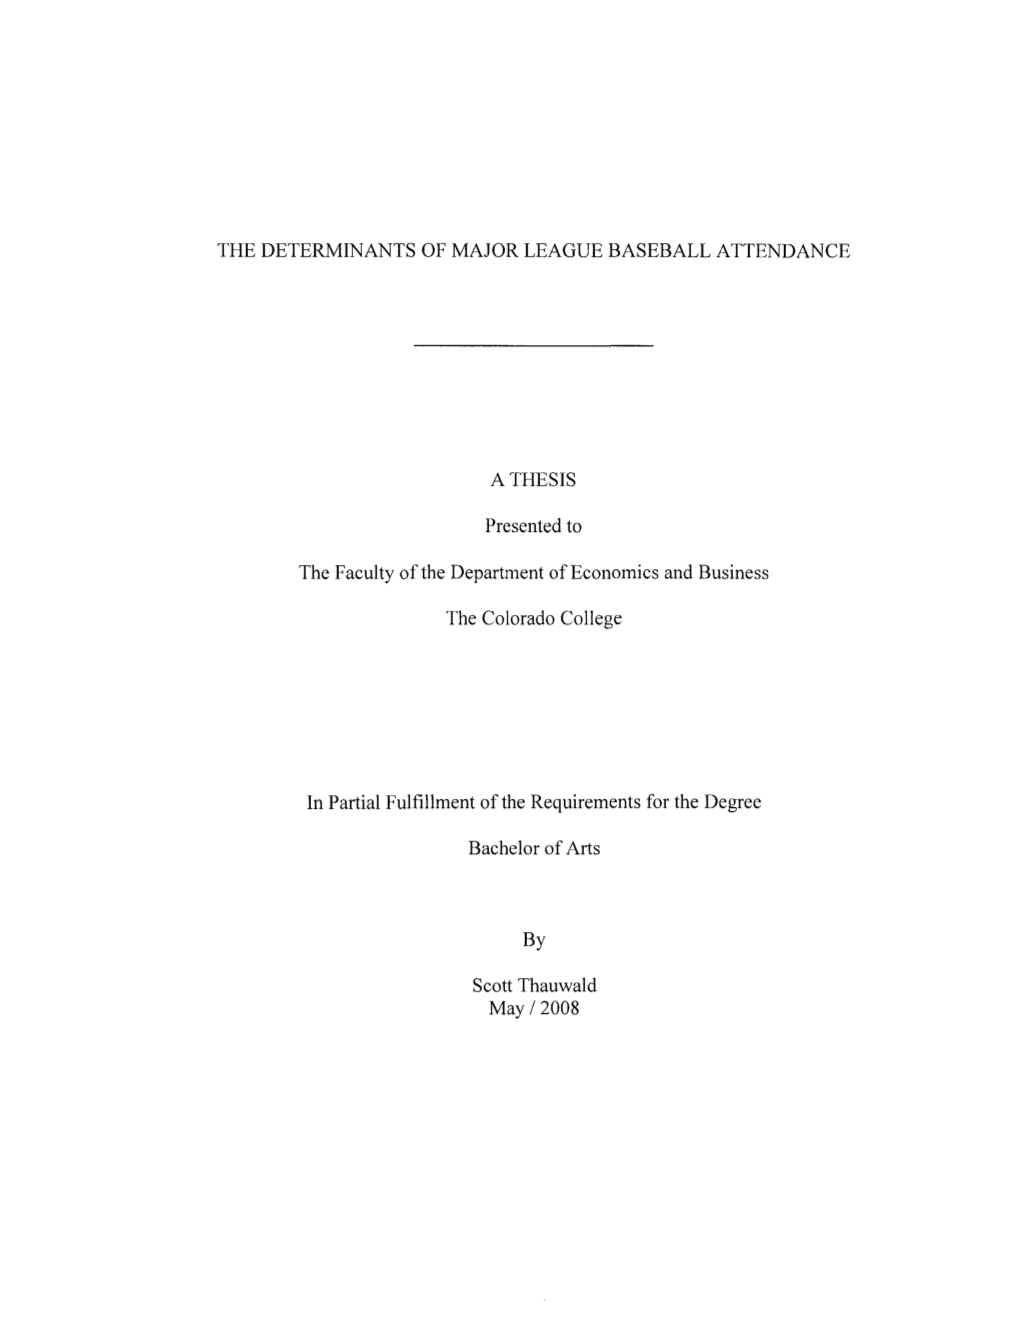 THE DETERMINANTS of MAJOR LEAGUE BASEBALL ATTENDANCE a THESIS Presented to the Faculty of the Department of Economics and Busine